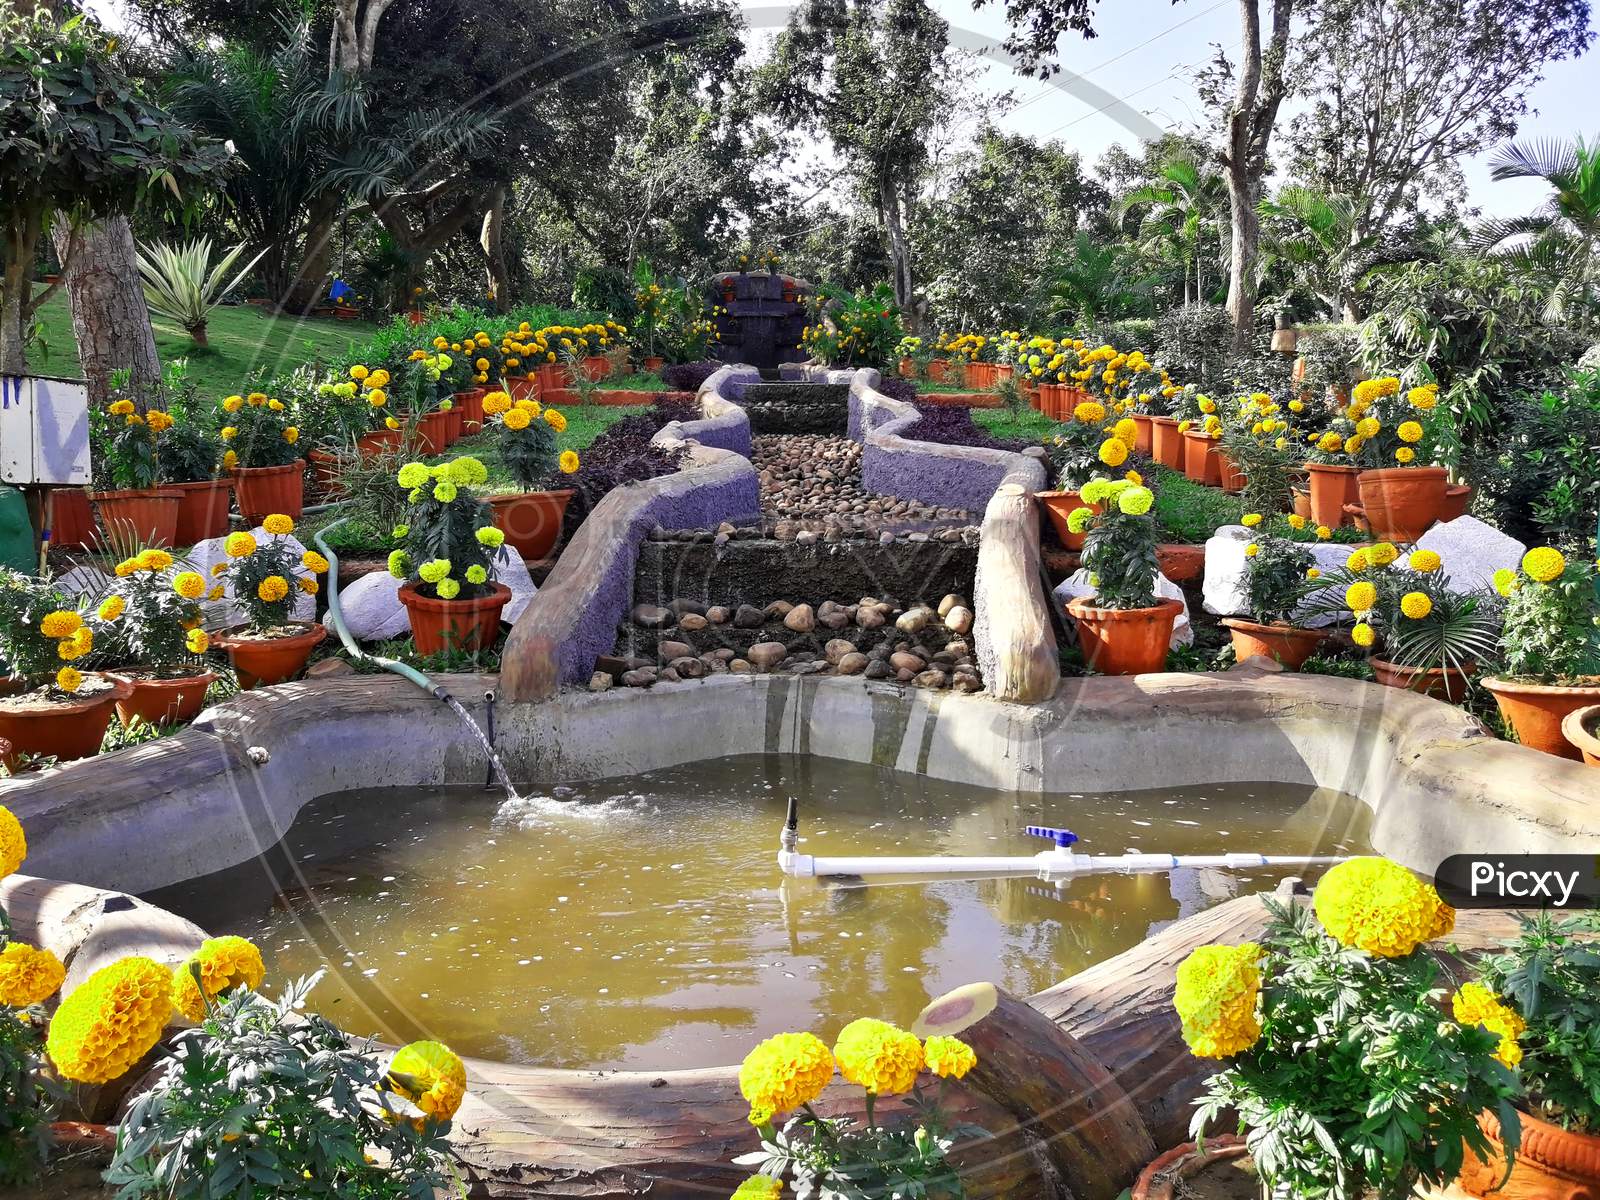 A Beautiful Garden With Full Of Marie Gold Flowers And Red Flowers And An Artificial Fountain.